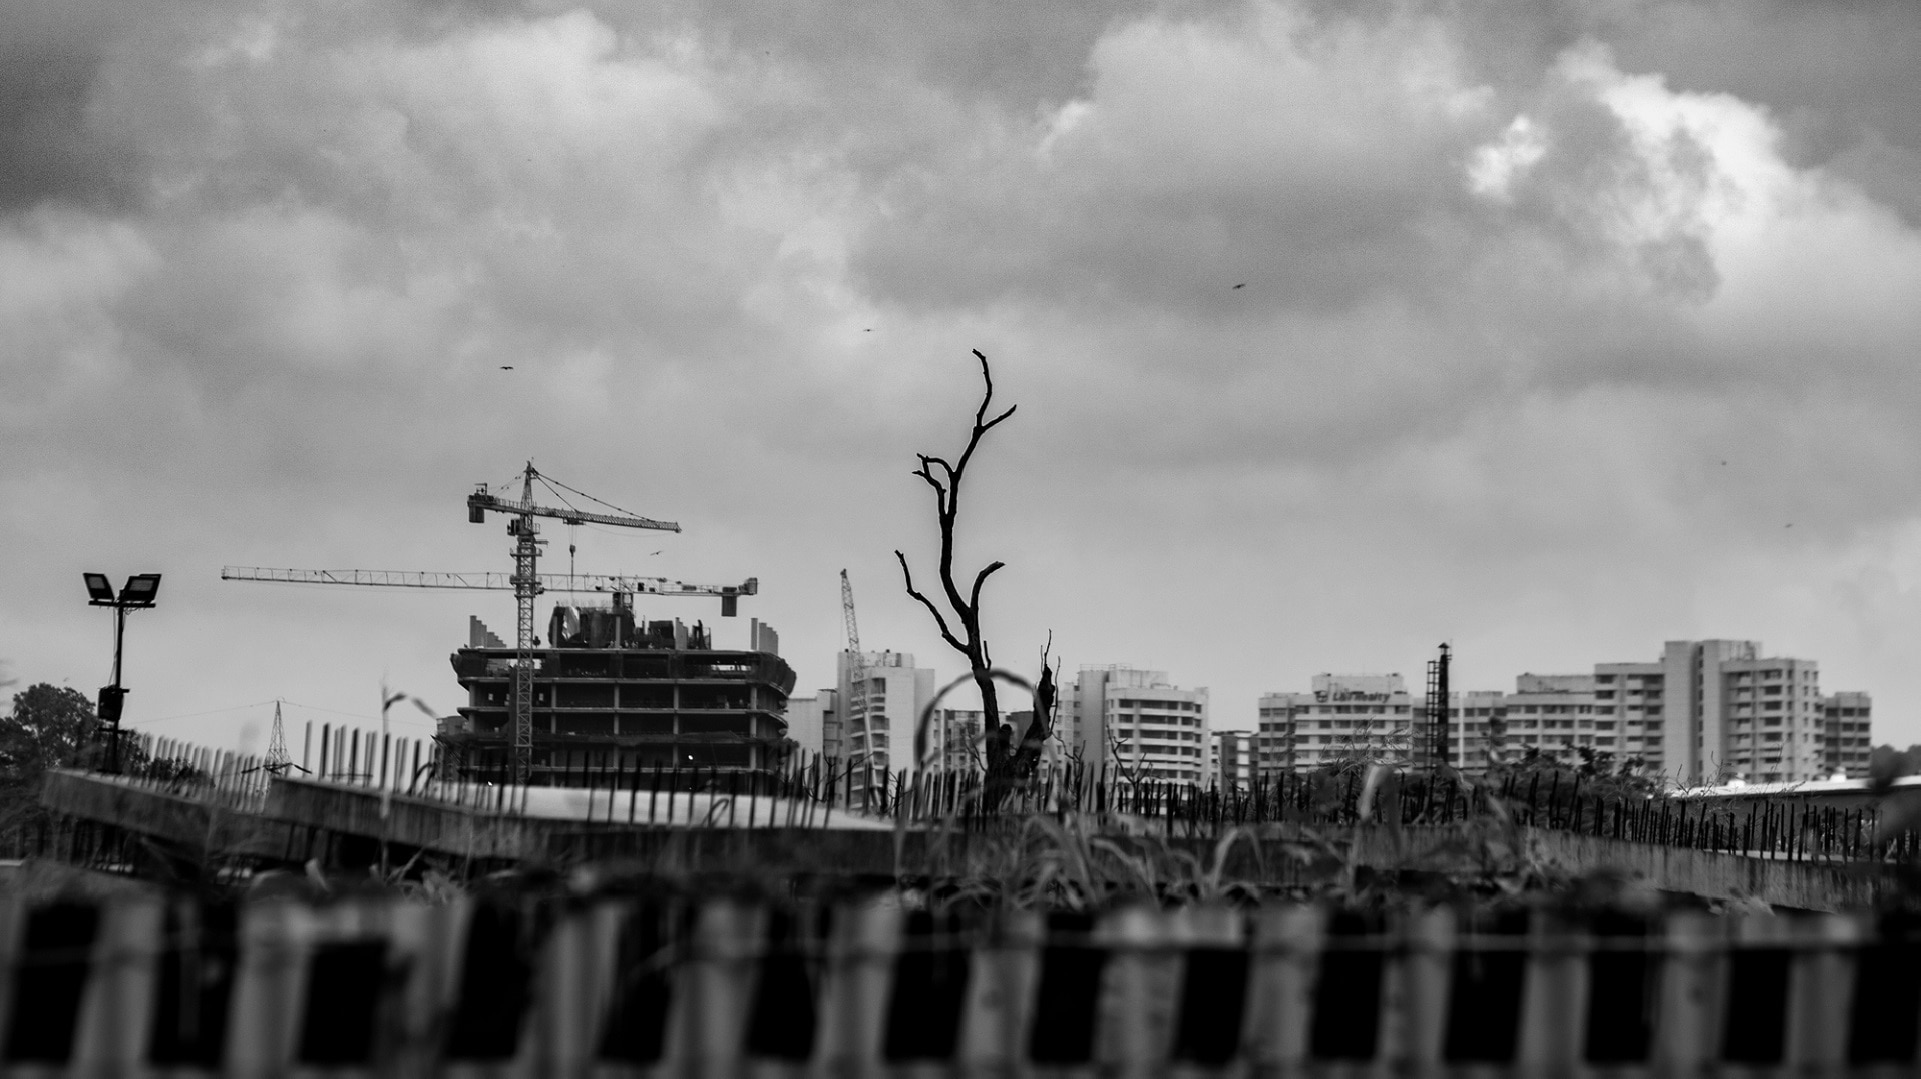 Aarey's condemned trees: A look at some of the 2,700 green sentinels facing the axe